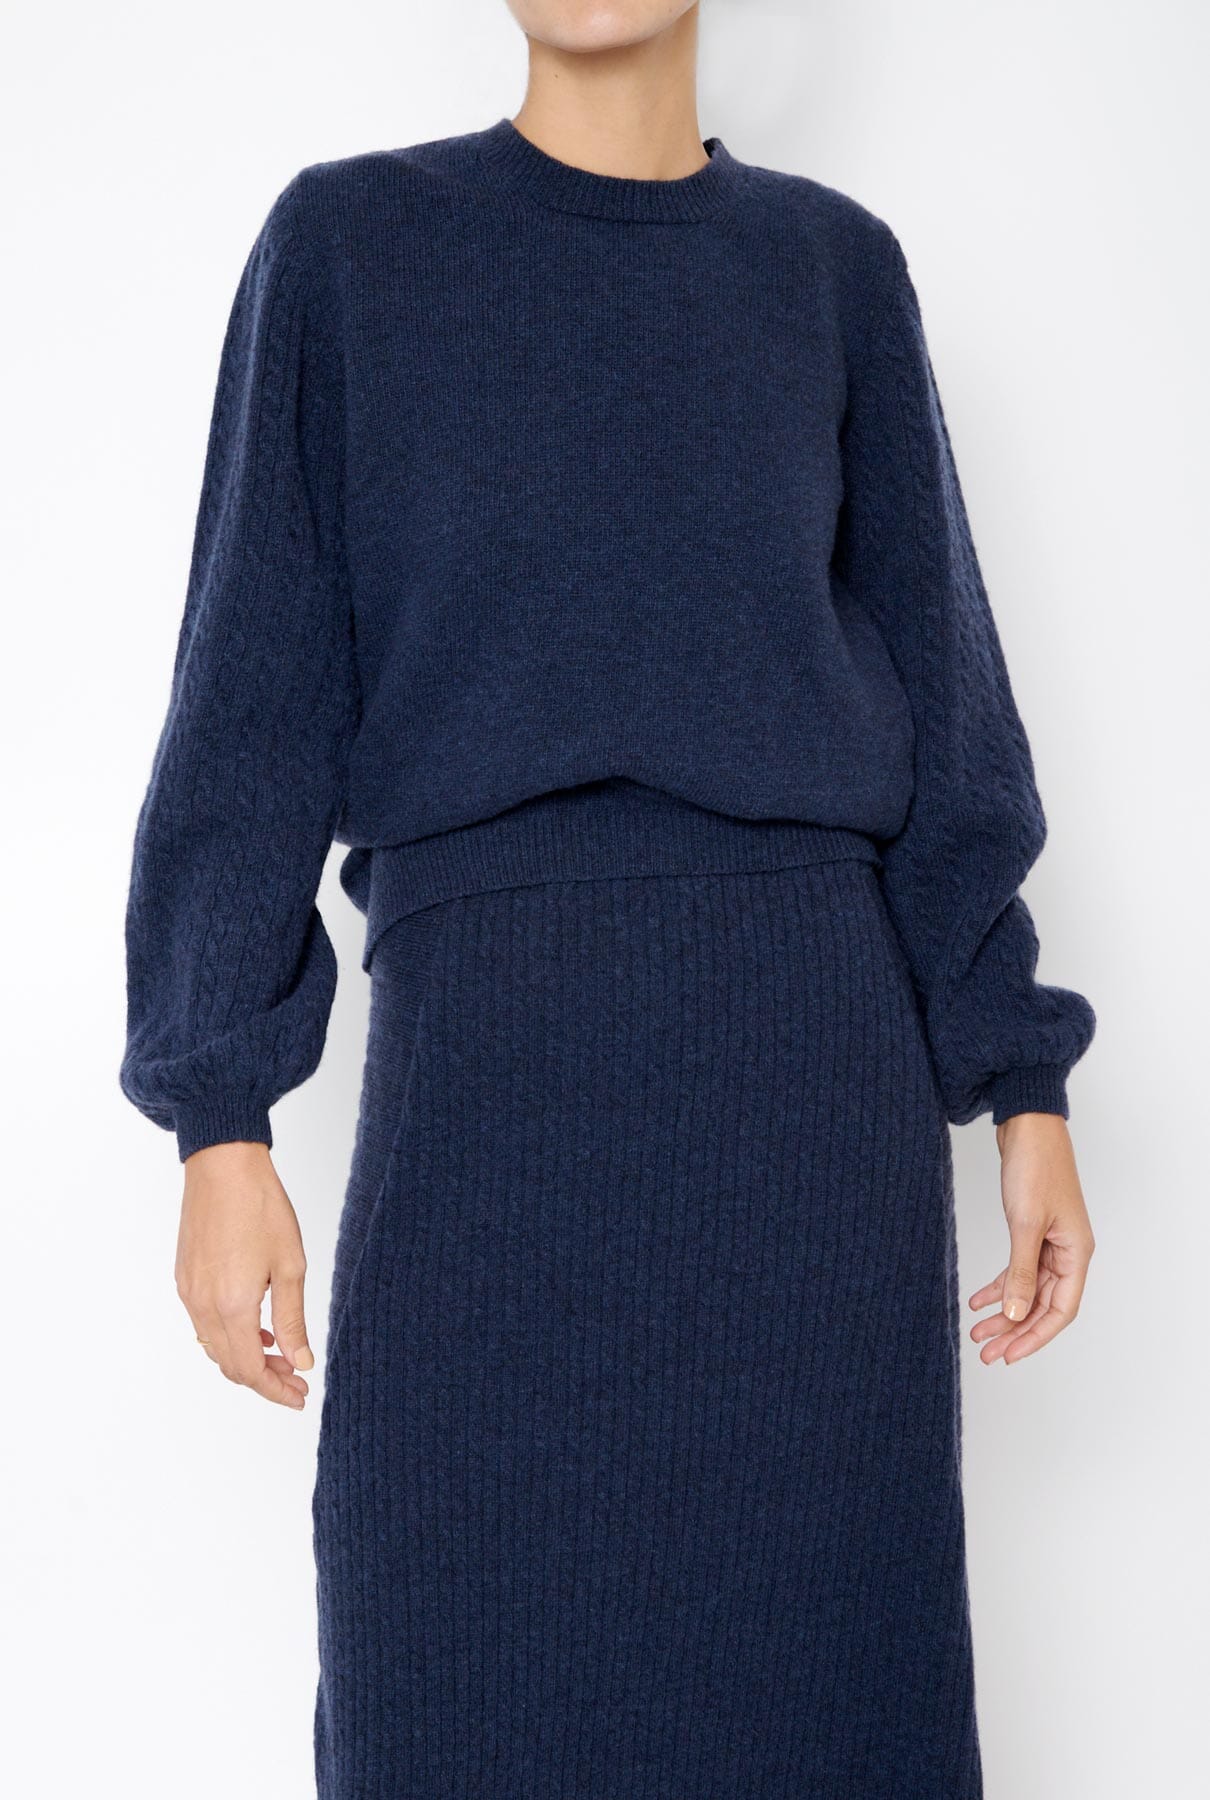 CECILIE CARDIGAN NAVY Sweaters Culto 1105 